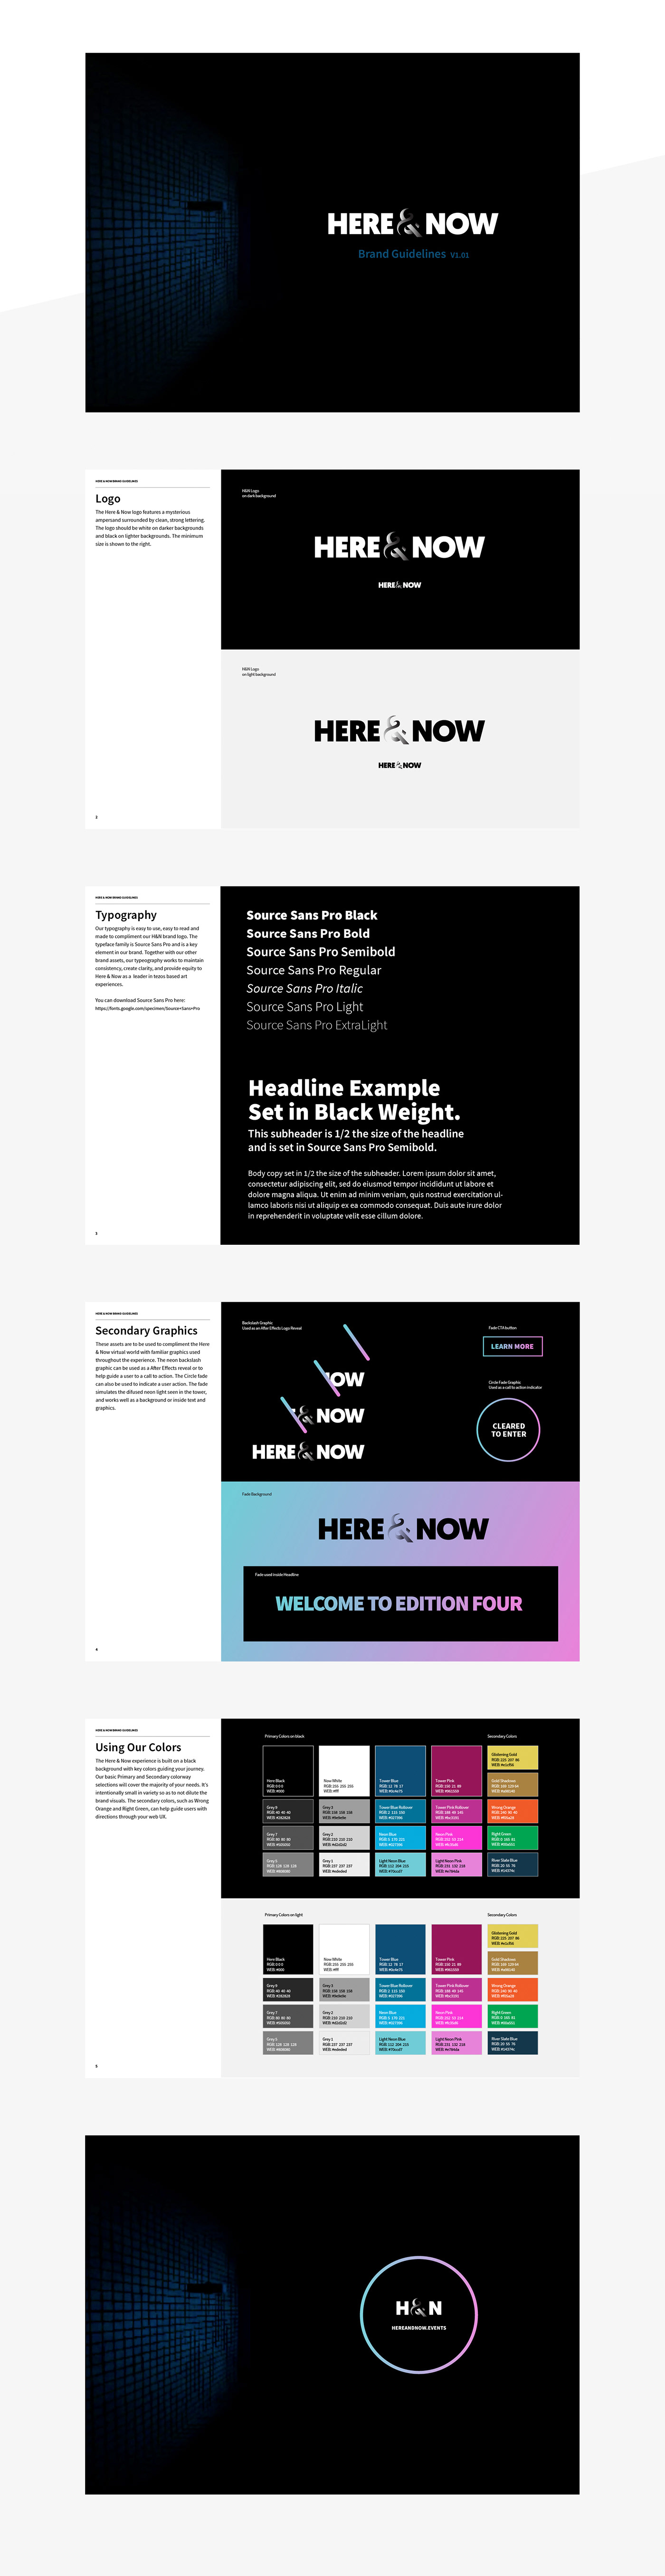 art direction  brand guidelines branding  design Here and Now metaverse nft roadmap Tezos web3